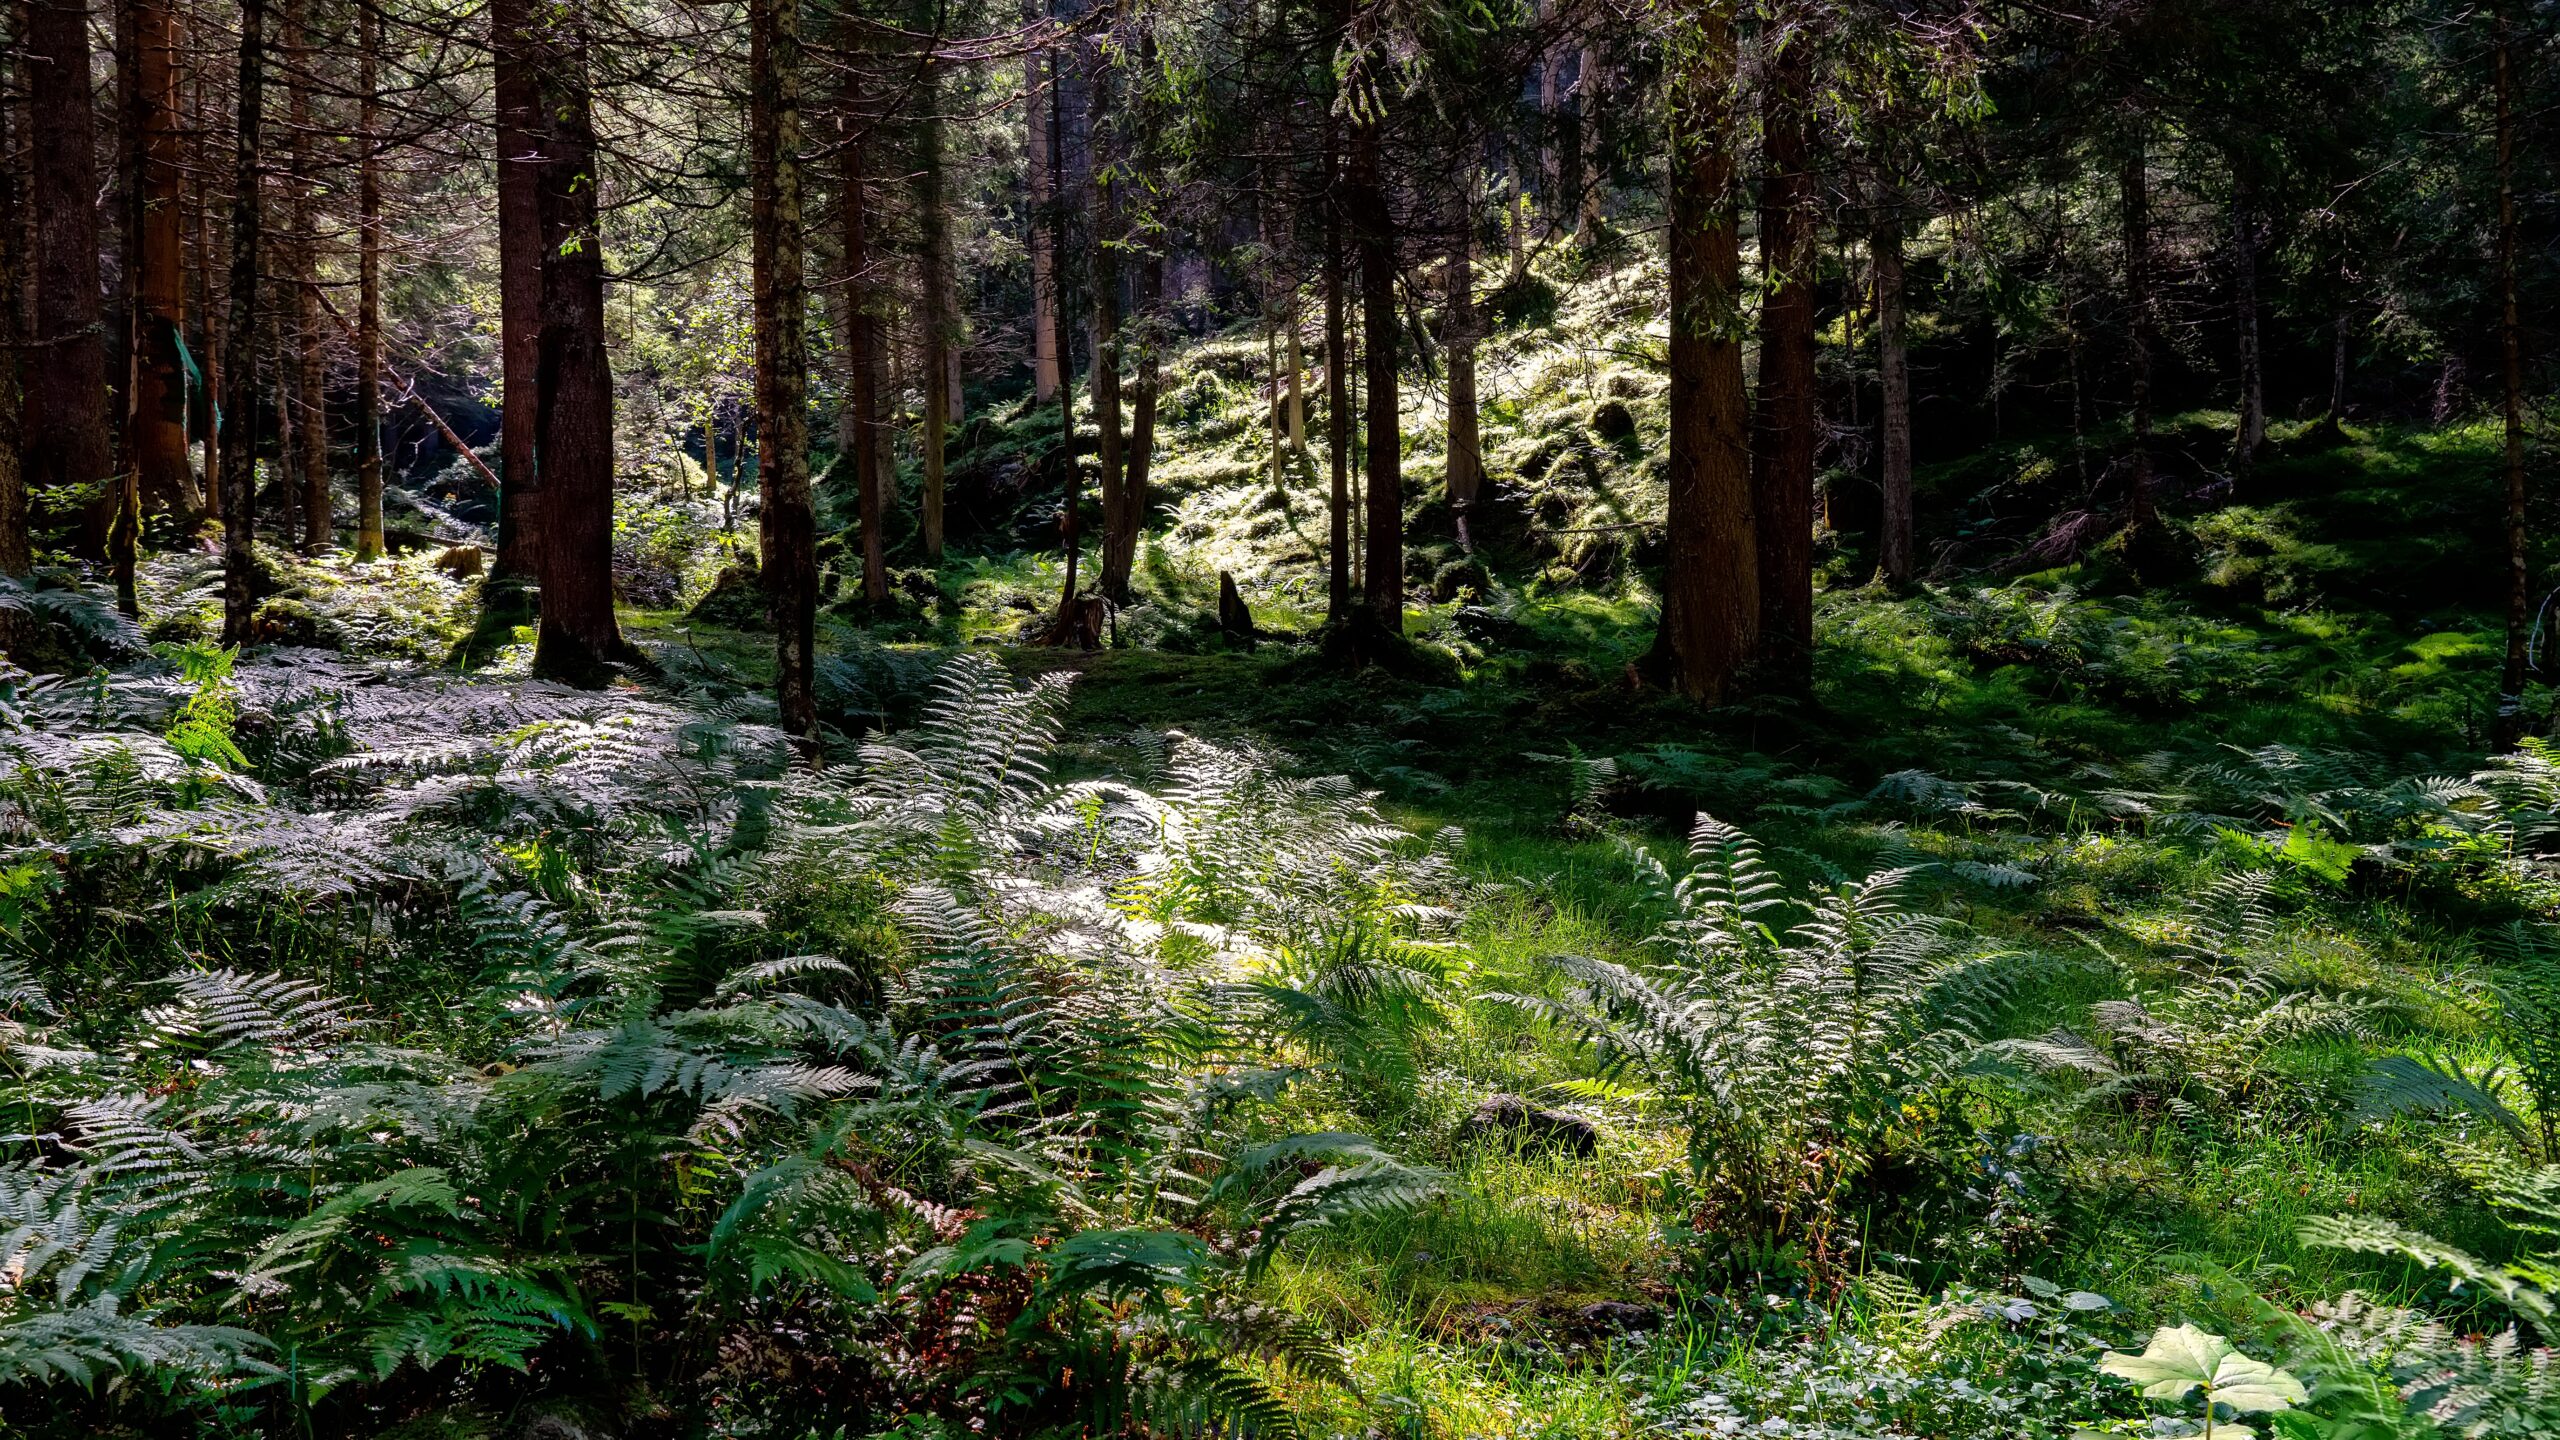 Forest setting with trees and ferns.